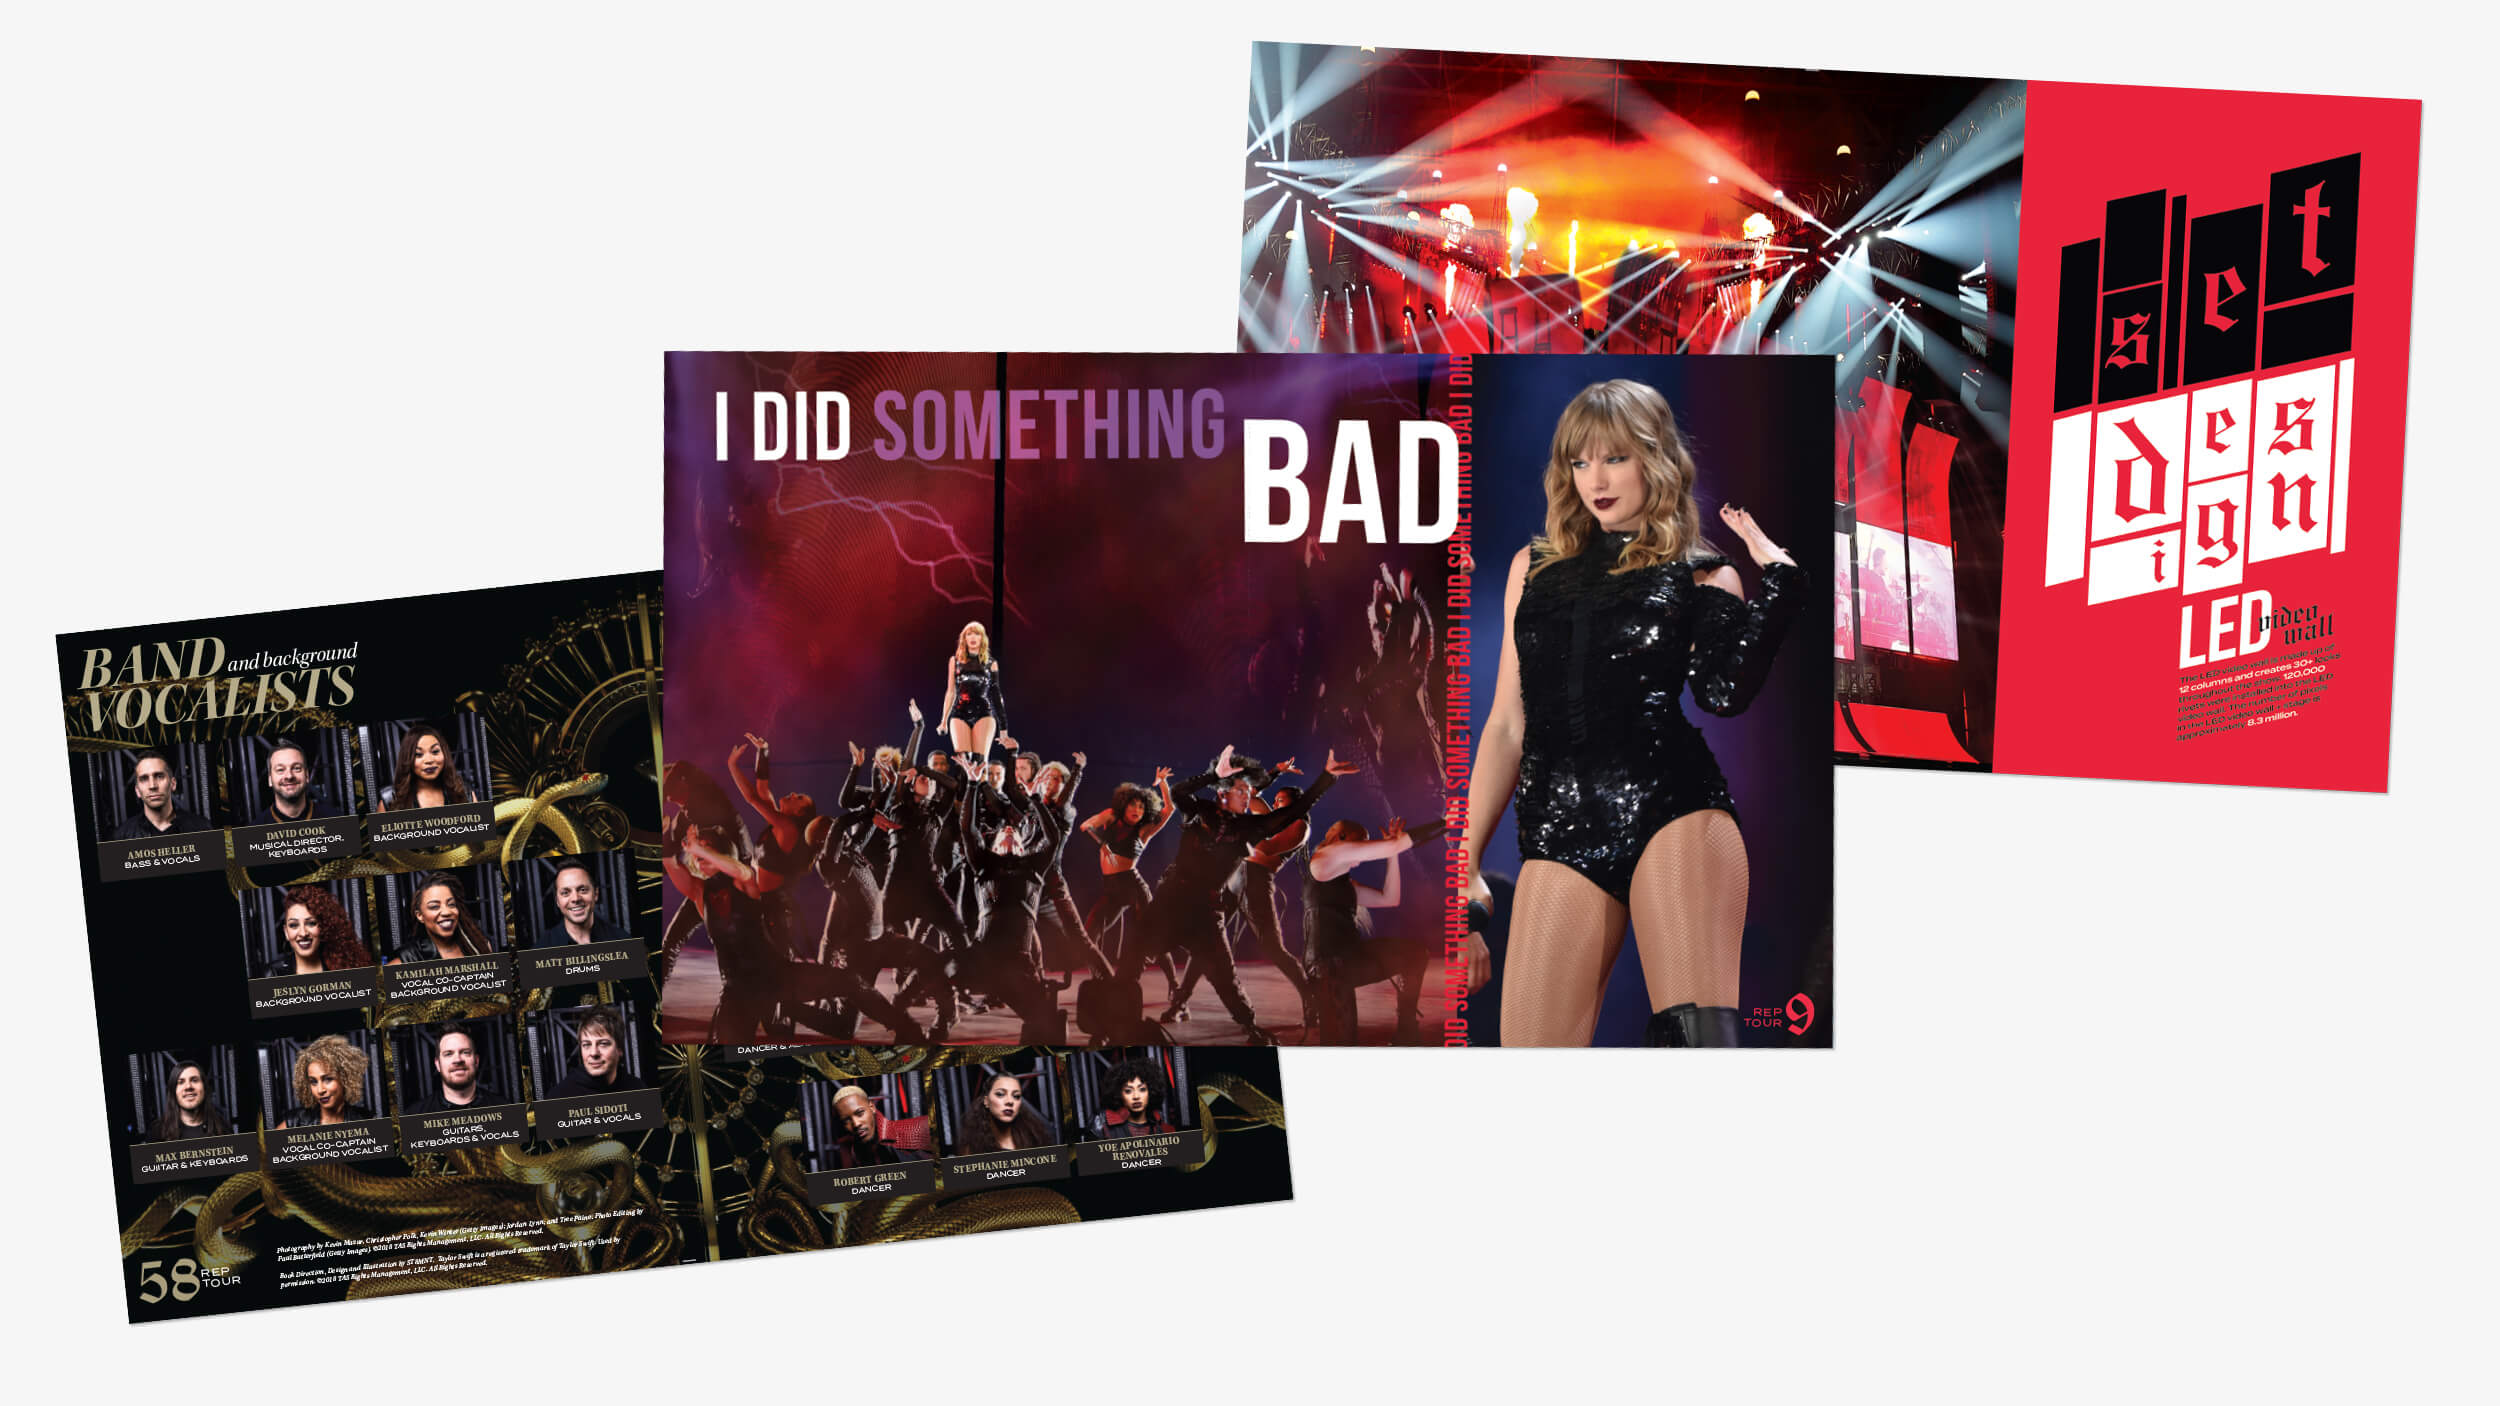 Taylor Swift reputation Tour Book spreads featuring live photos, band and dancers, set design details